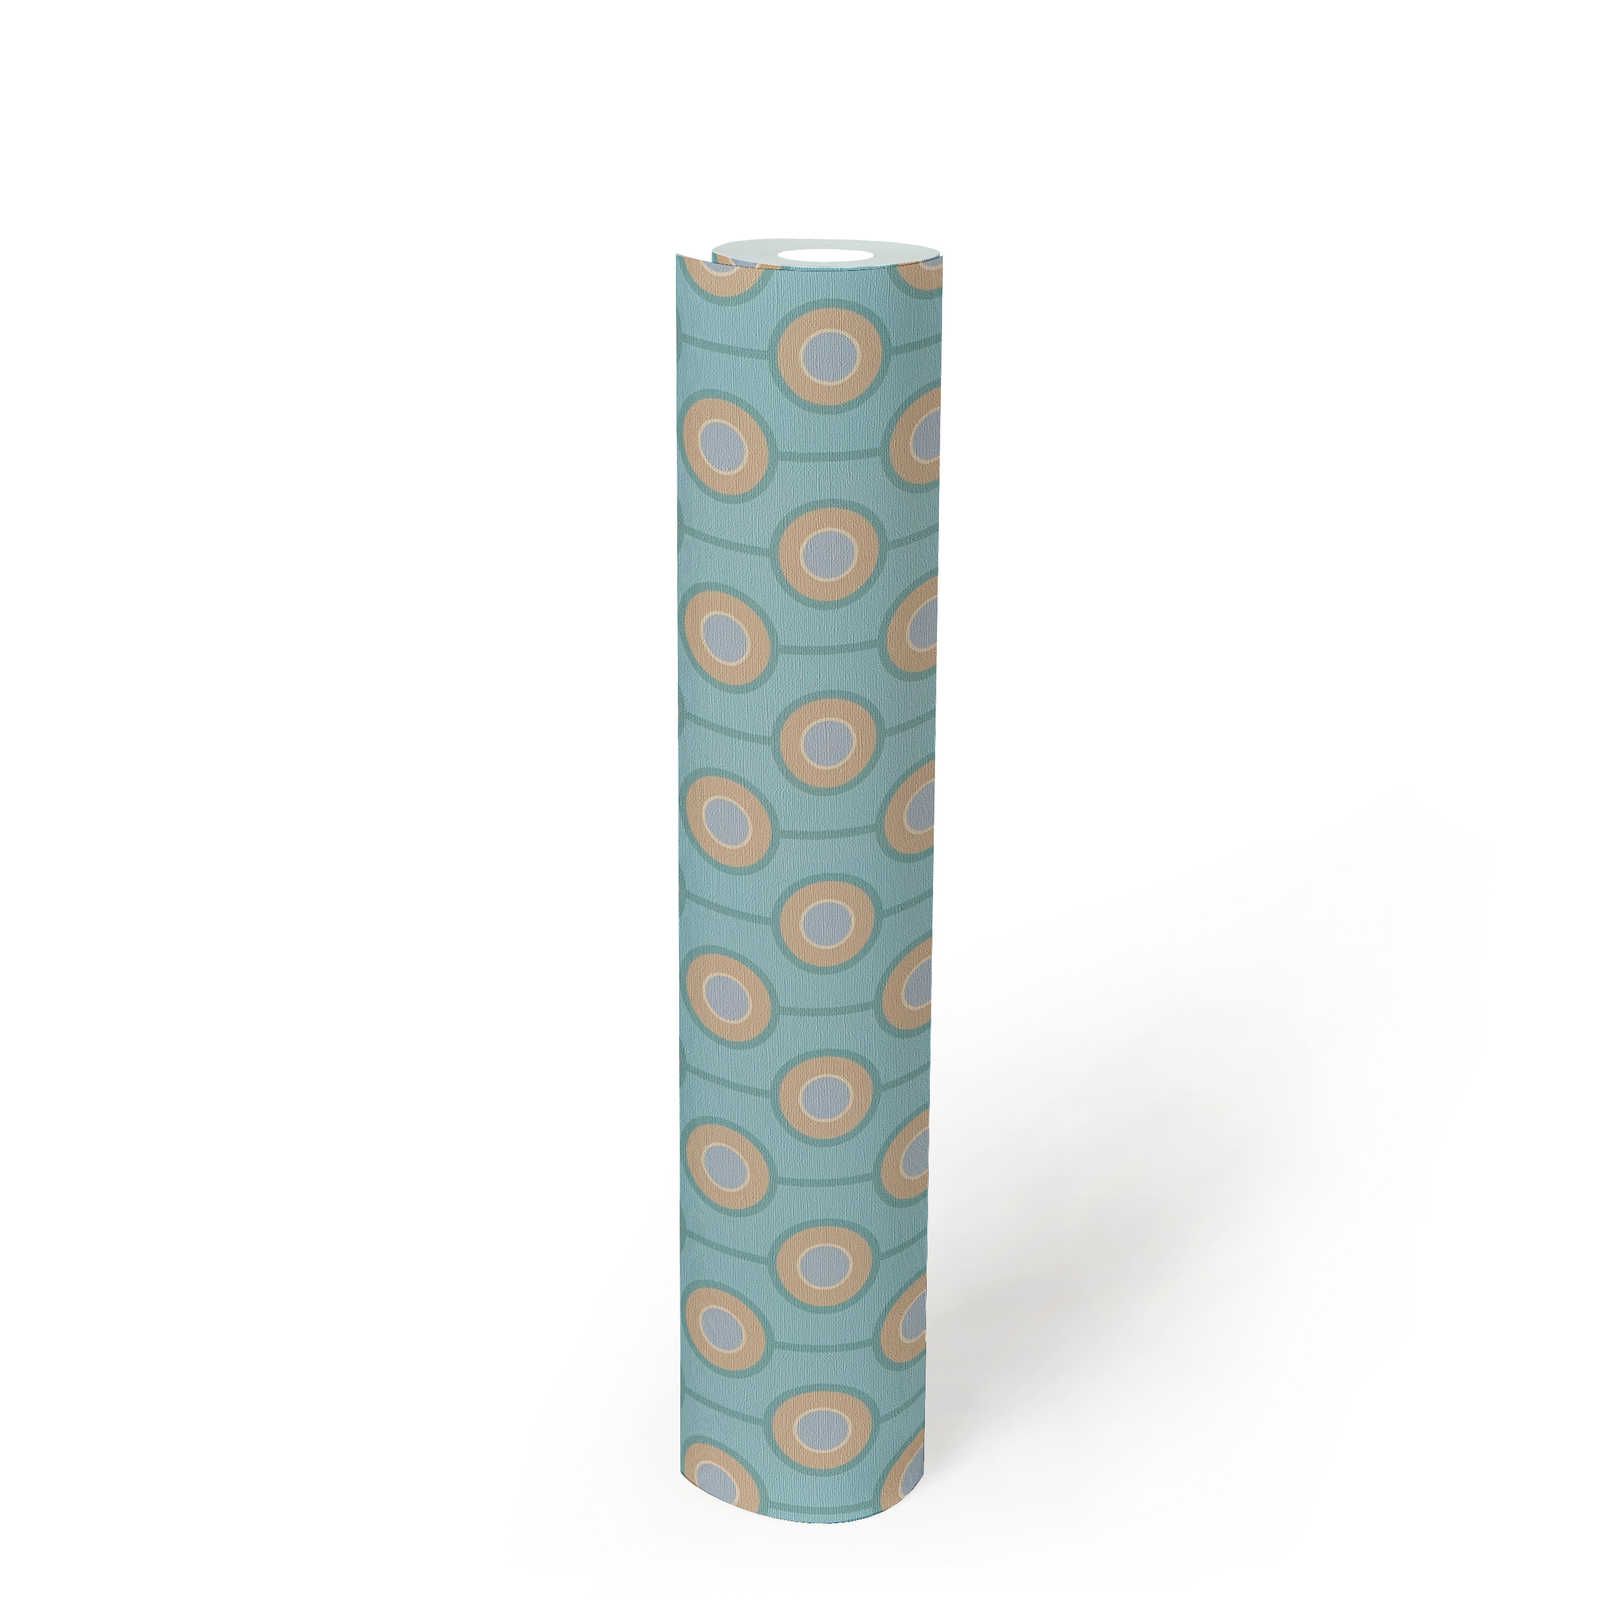             Retro circle pattern on lightly textured non-woven wallpaper - turquoise, blue, beige
        